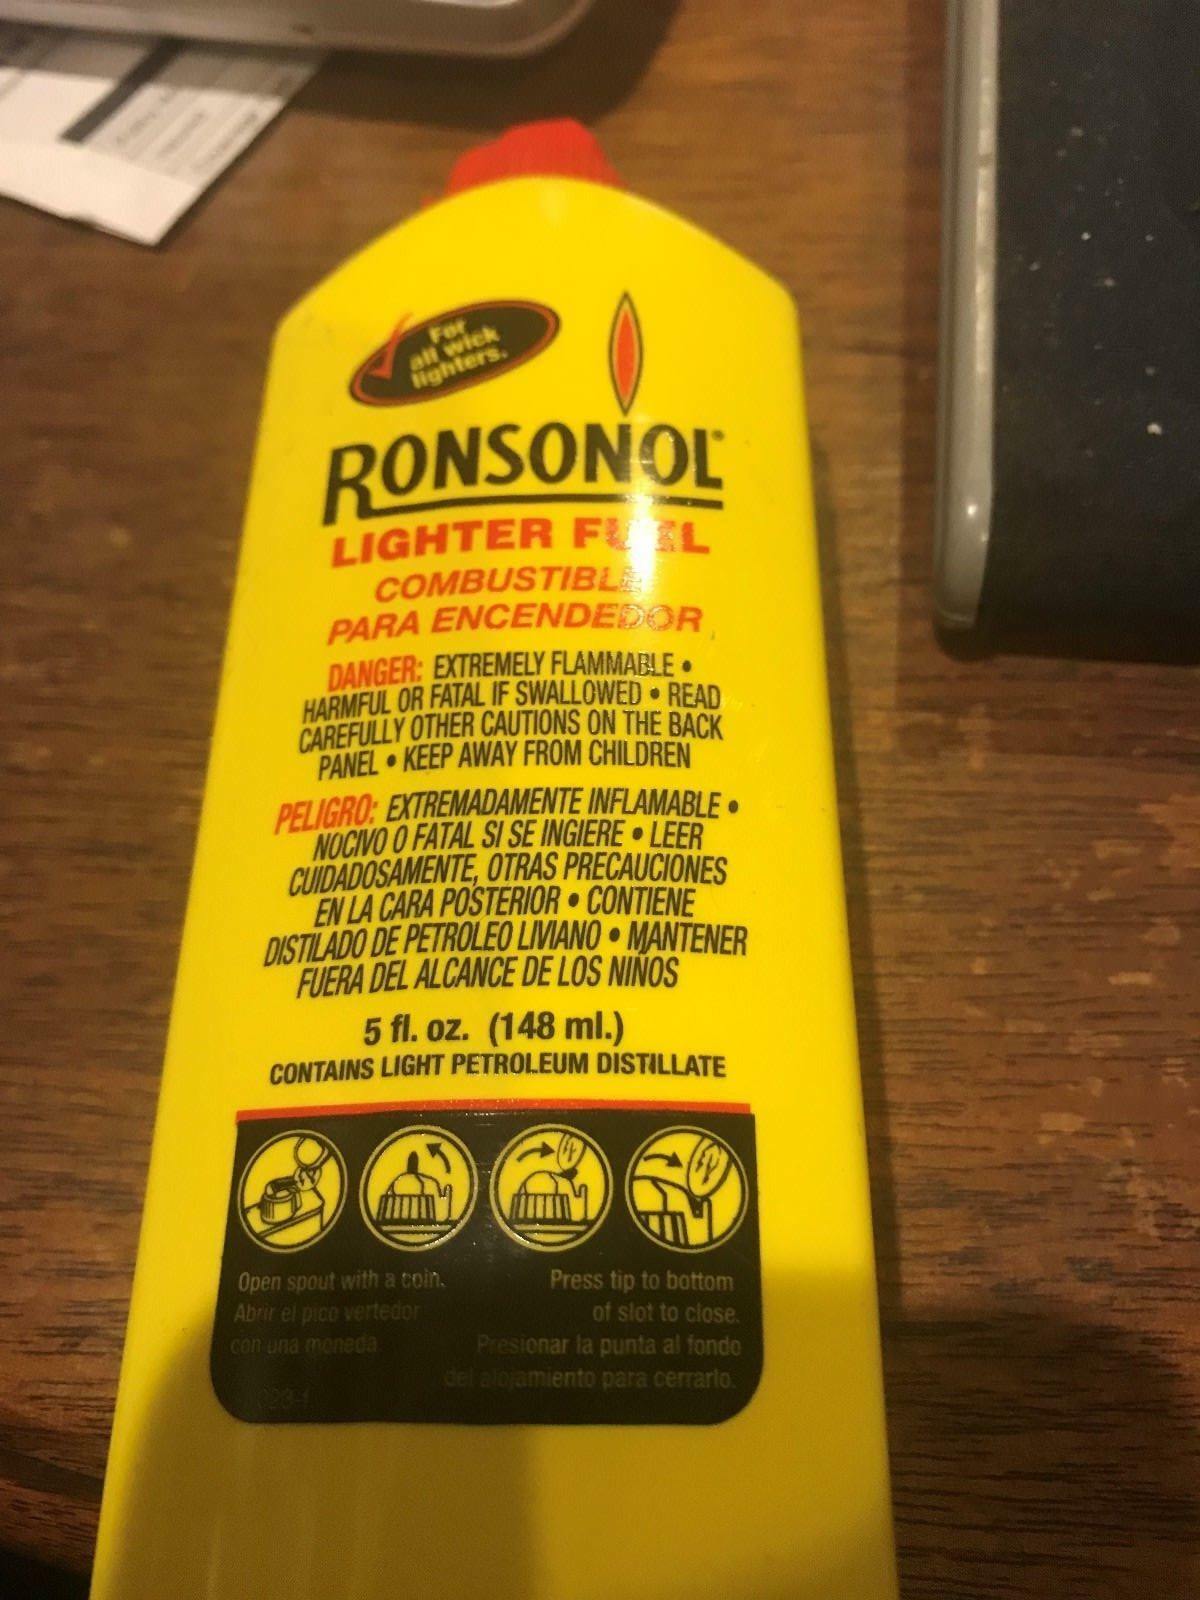 Ronsonol Best Lighter Fuel 5 Oz Bottle Works With All Wick-type Lighters